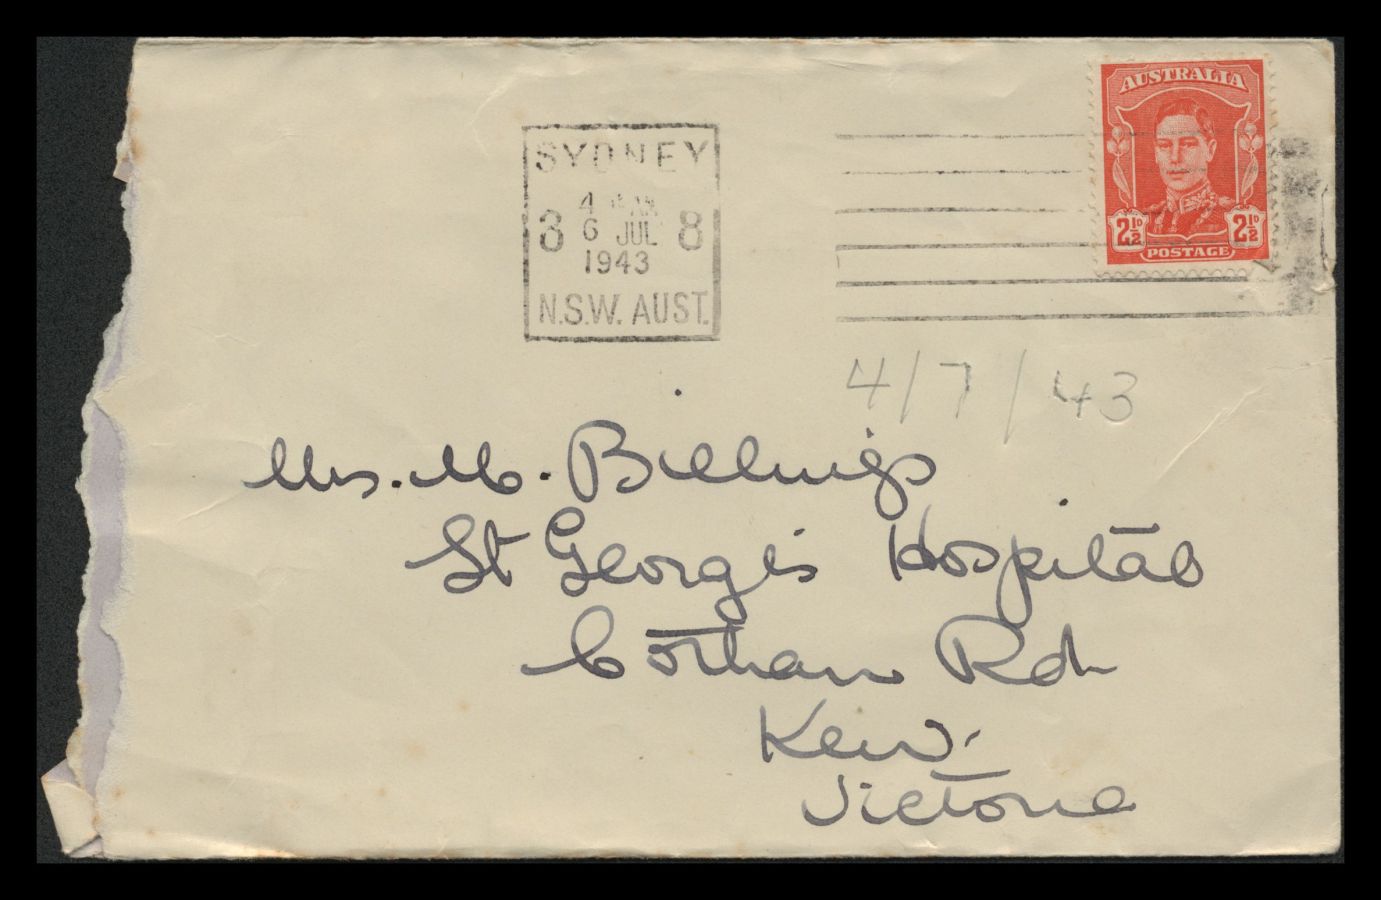 Envelope addressed to Mrs. M. Billings dated 4 July 1943